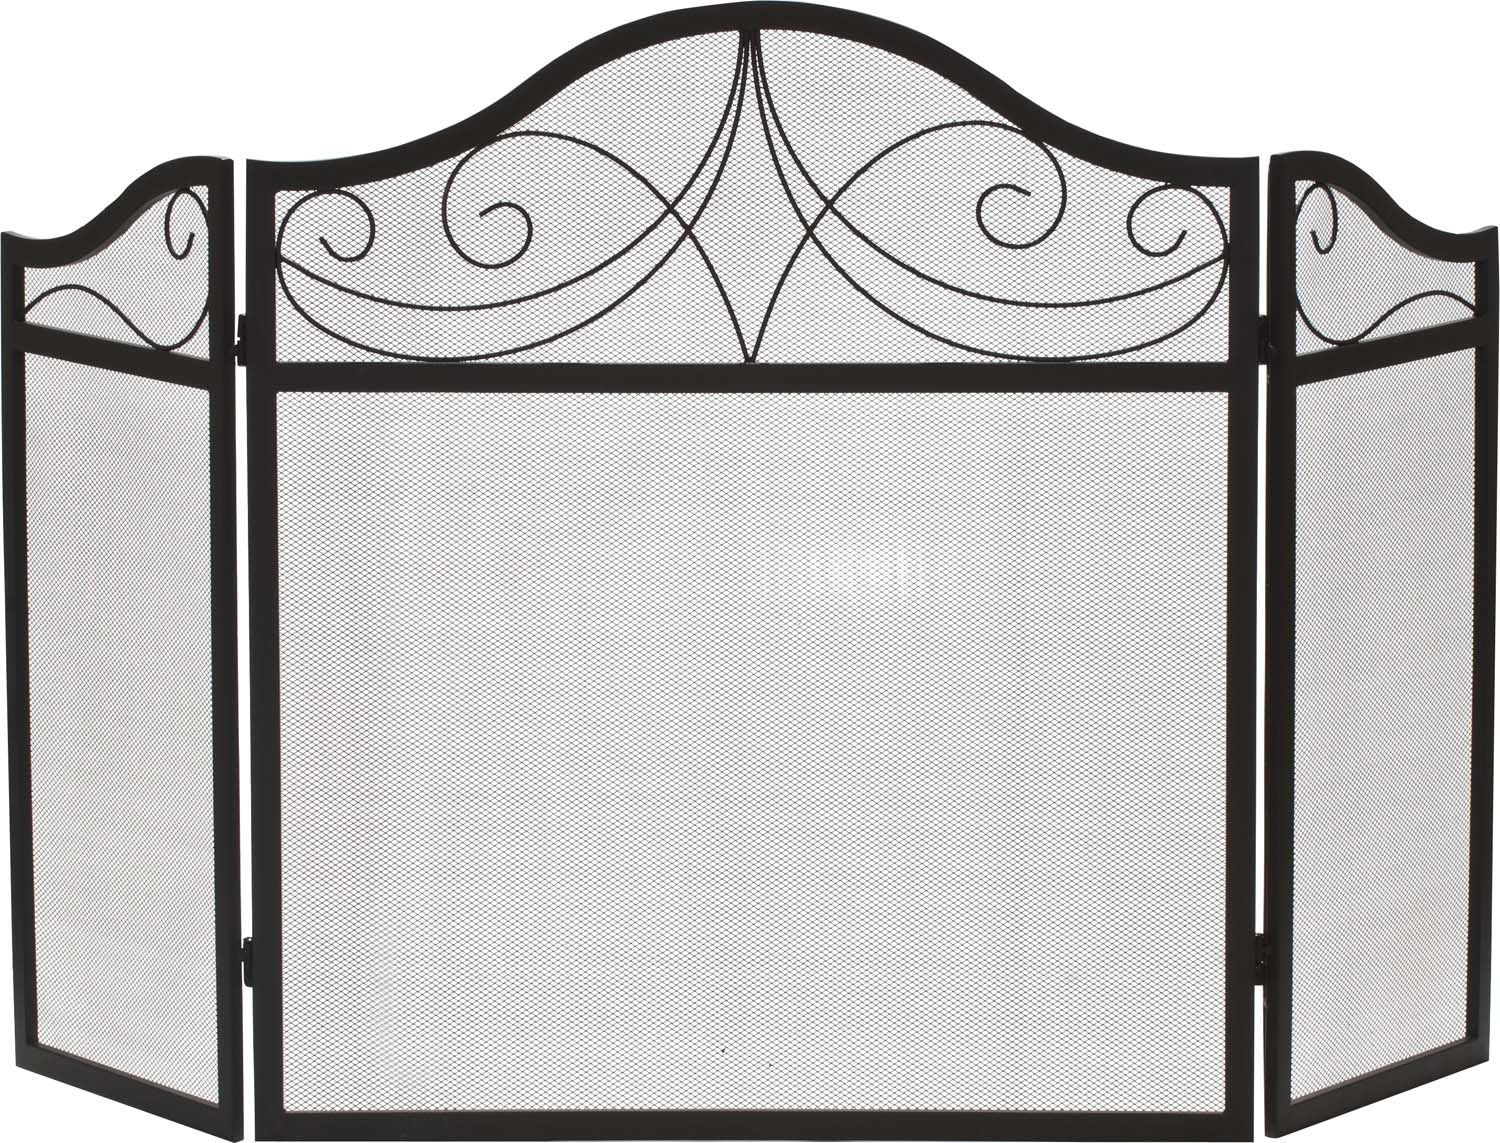 Dagan Industries 52" x 30" Three Fold Black Wrought Iron Arched Fireplace Screen